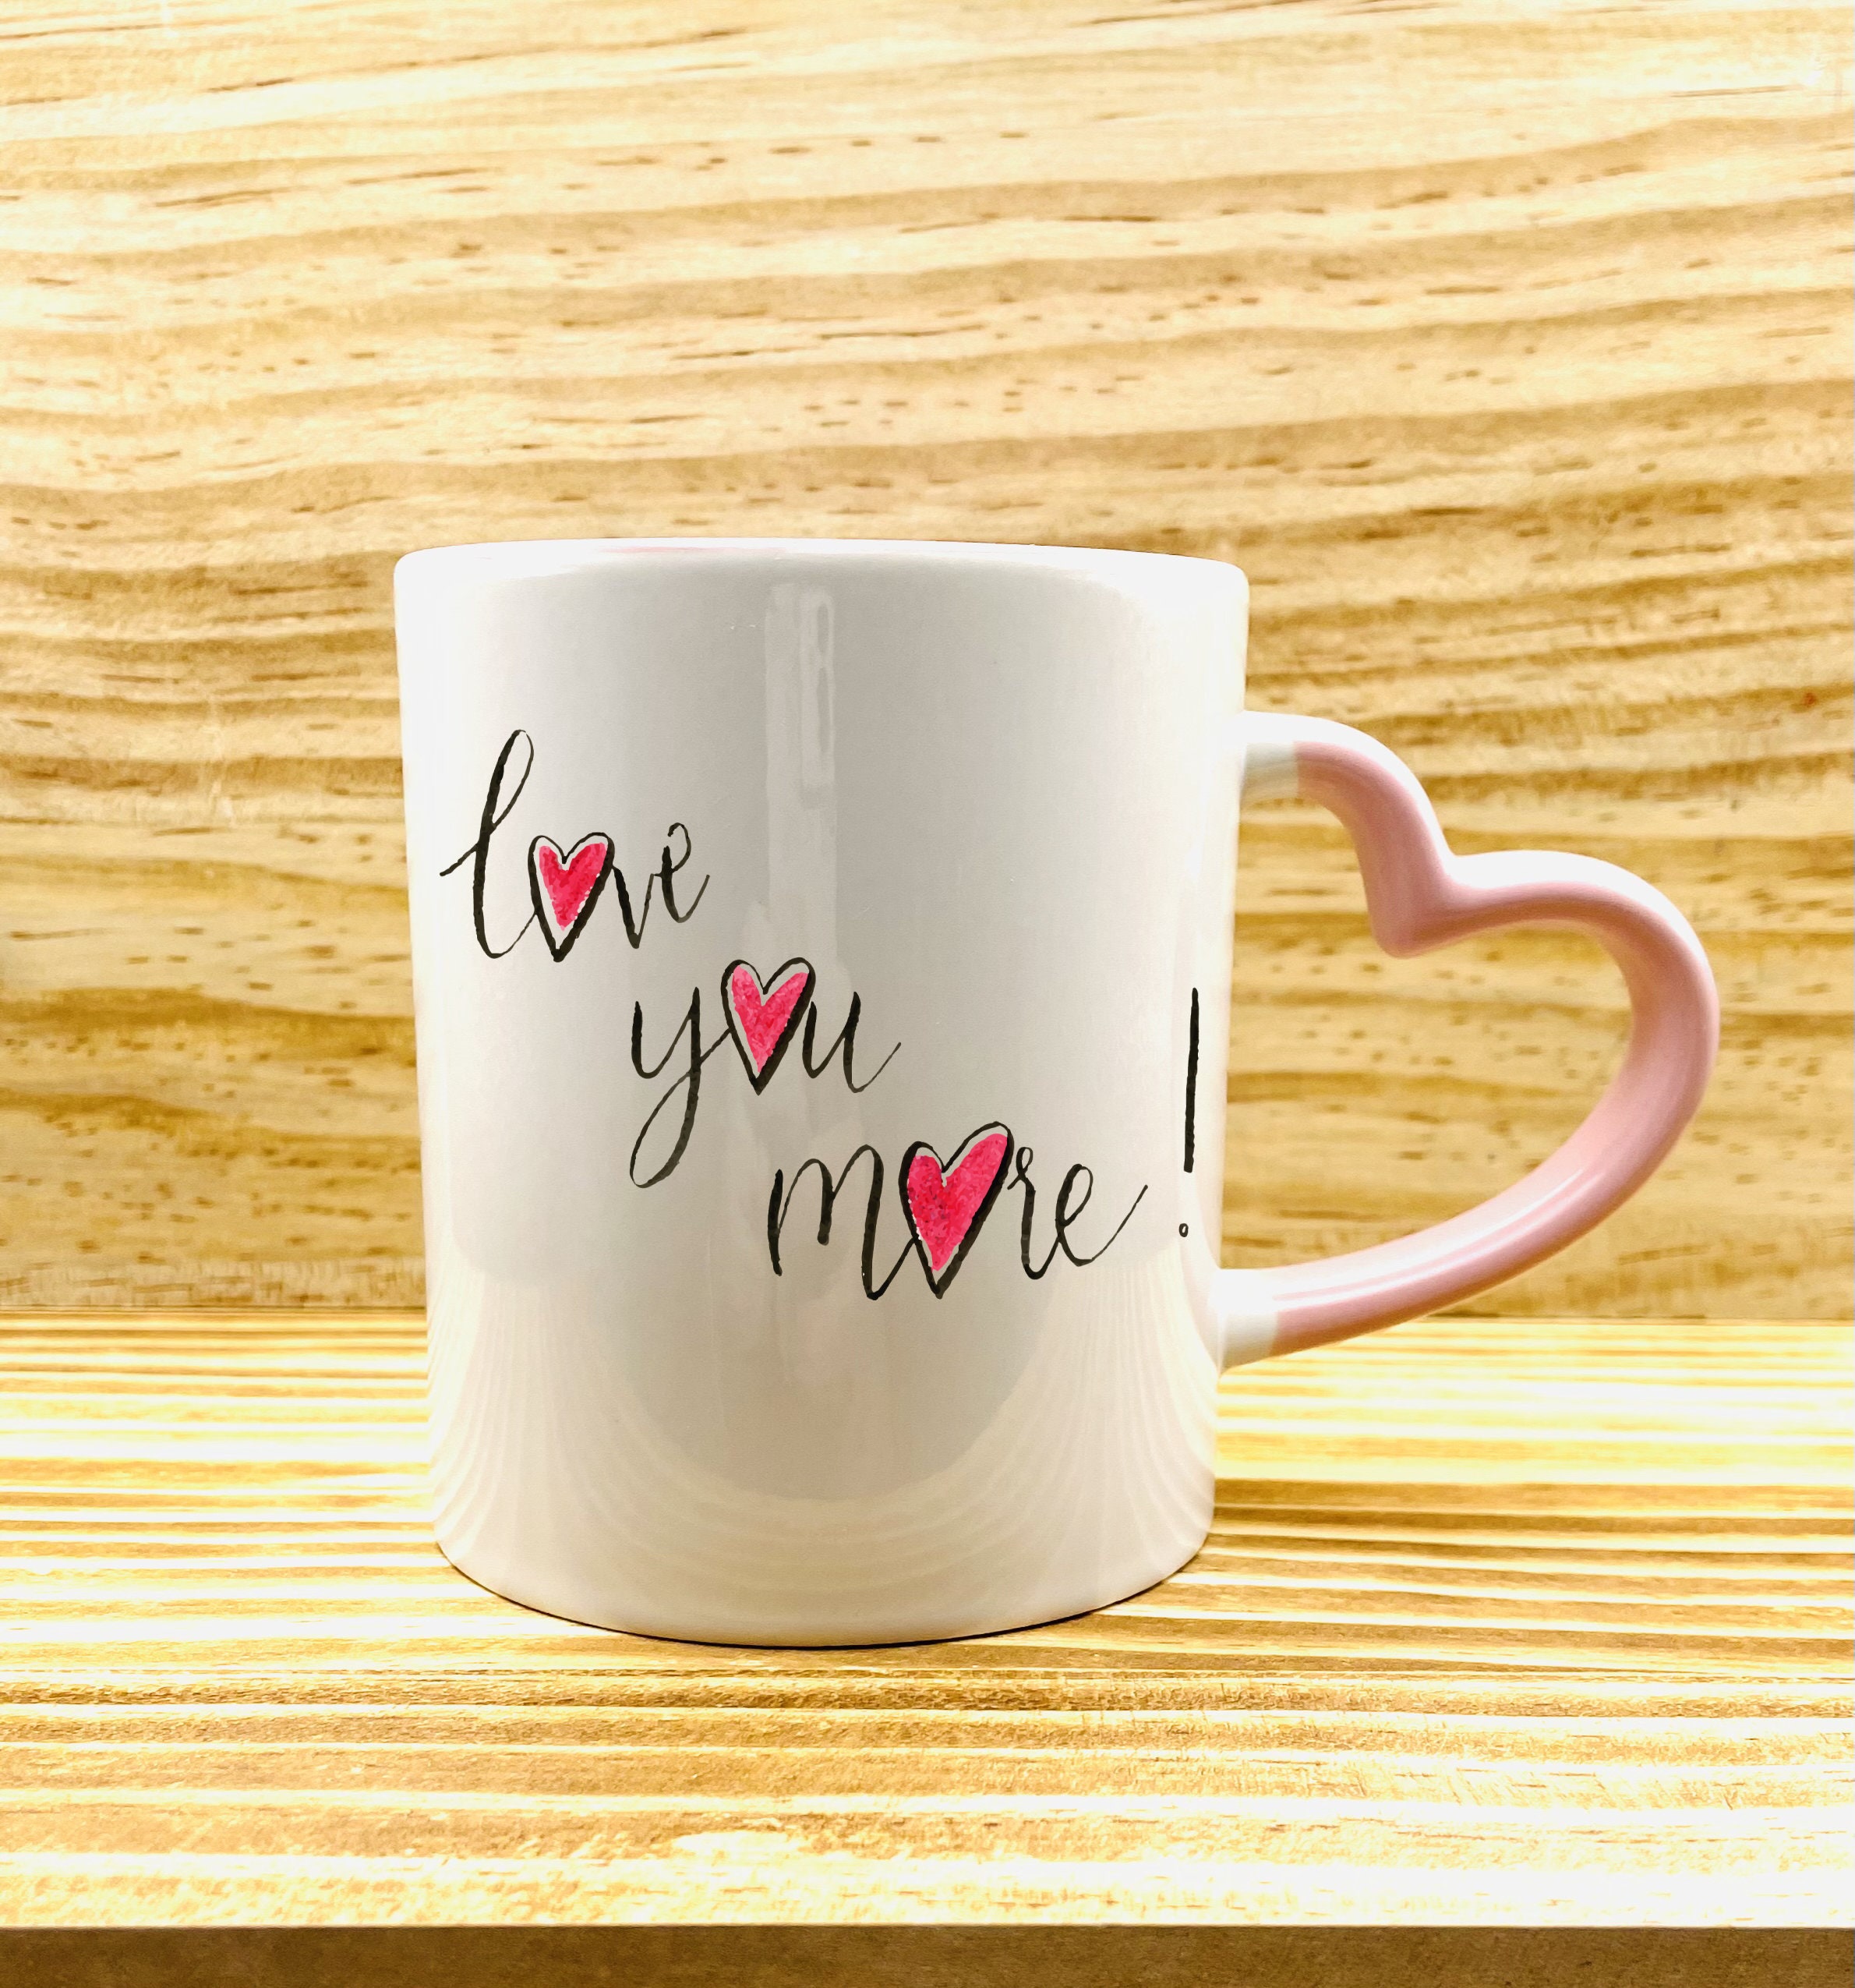 MR.R 11oz Set of 6 Sublimation Blank Coffee Mugs,Cup Blank White Mug Cup with Yellow Inner Color Mug and Heart Handle